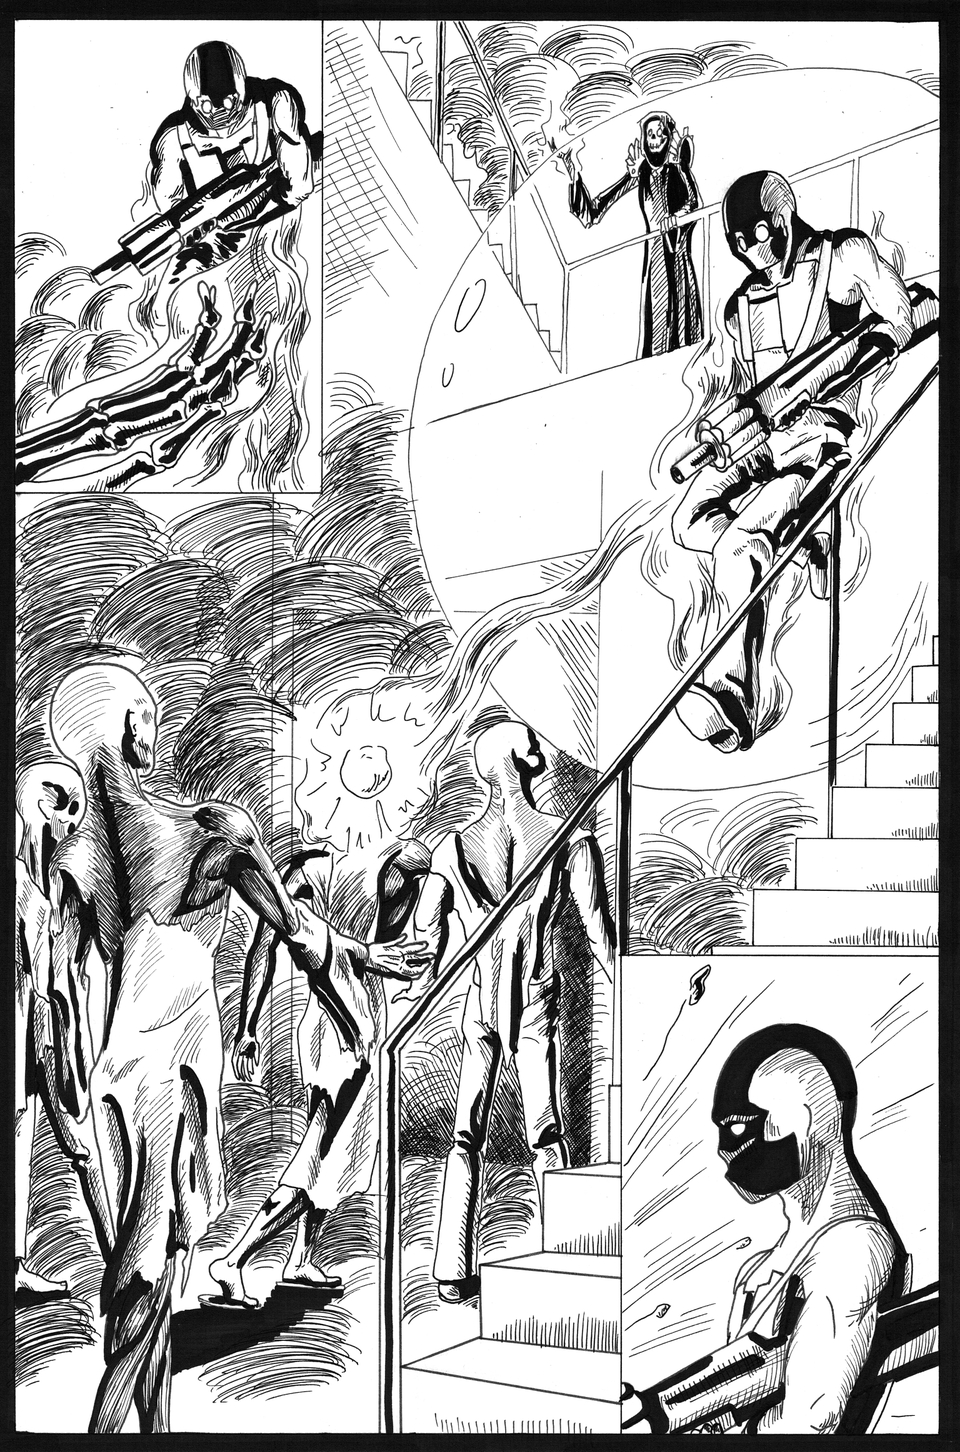 Issue 2, Page 12